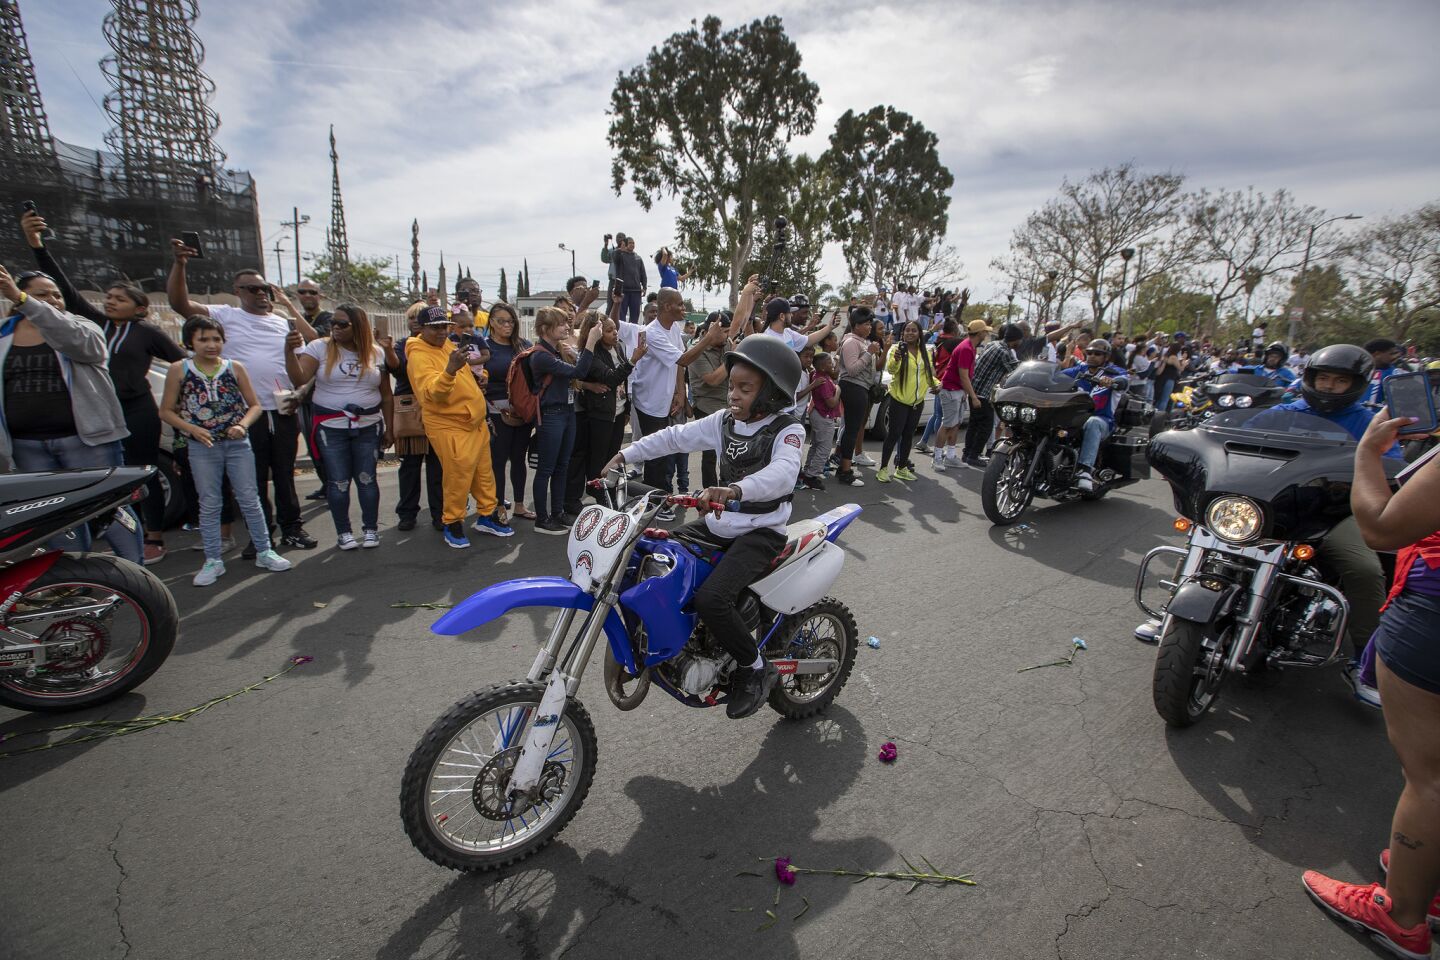 A child rides a dirt bike in the procession following the hearse in Watts.